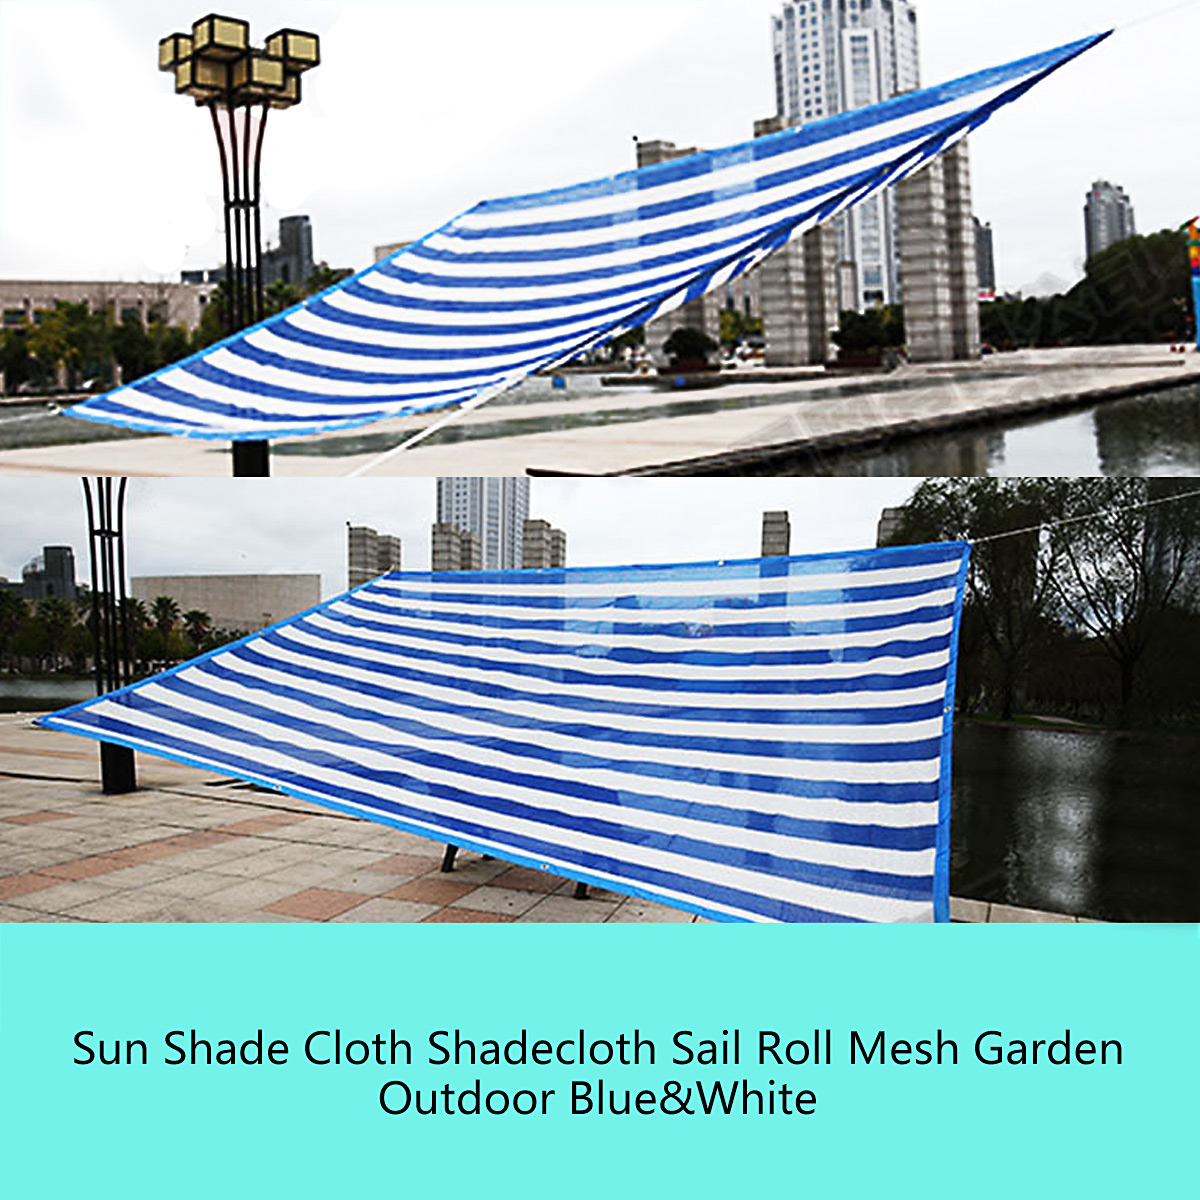 Outdoor Multi-sized Sunshade Sail Cloth Rectangle Square Garden Patio Tent Canopy Awning 10